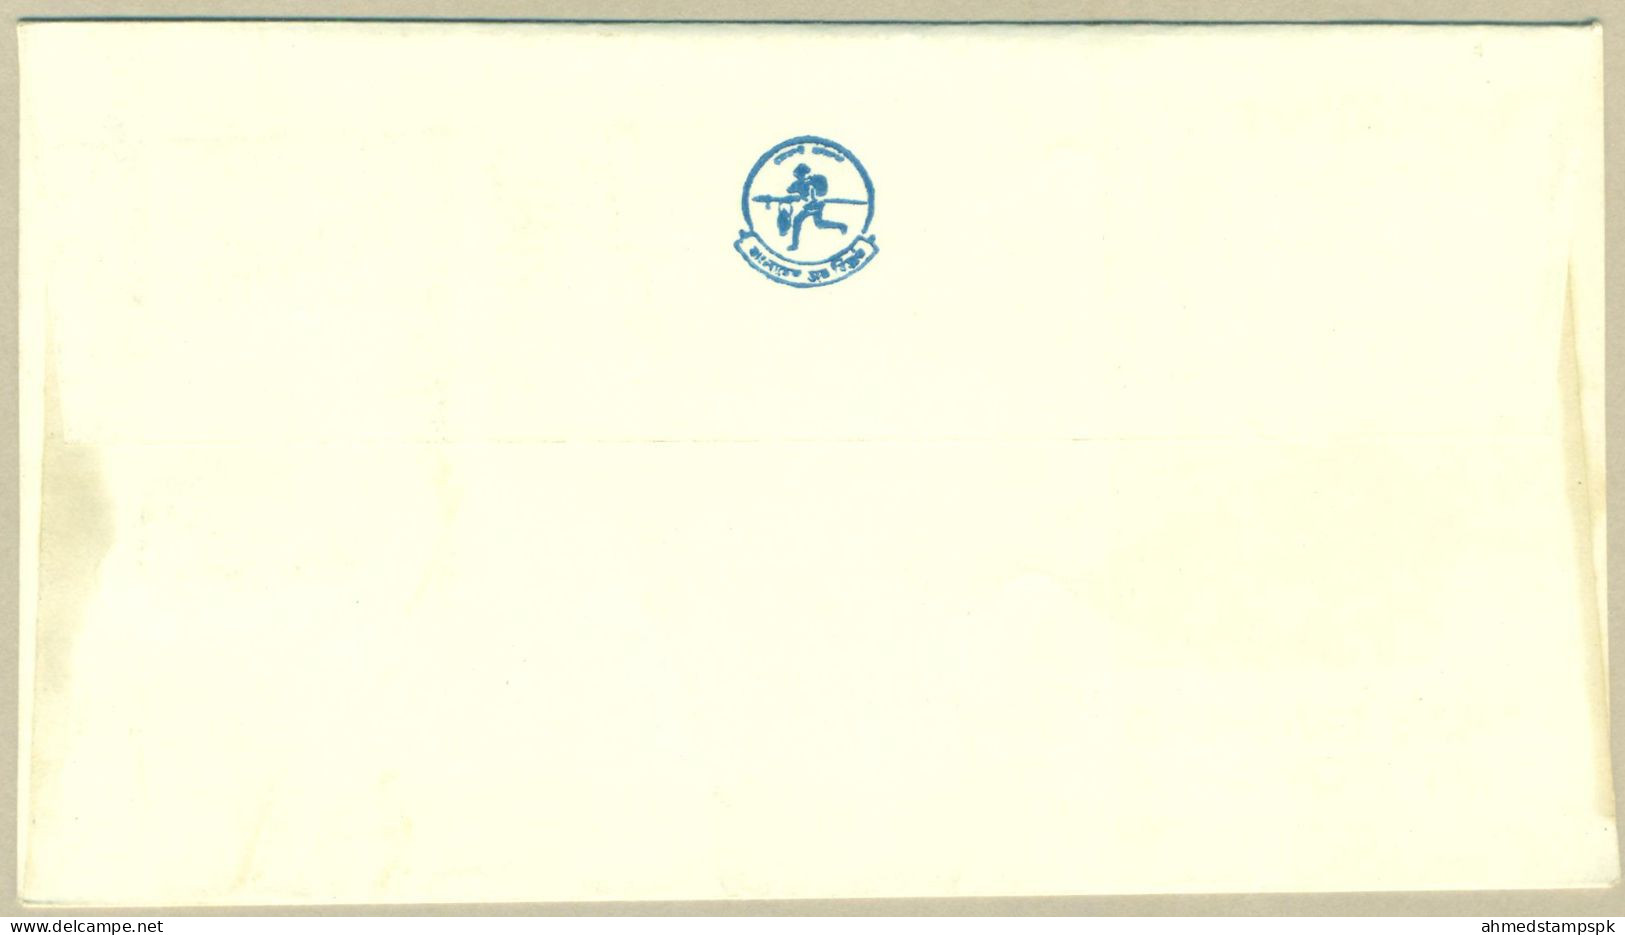 BANGLADESH 1979 MNH FDC 100th ANNERVERSARY OF SIR ROWLAND HILL'S DEATH  FIRST DAY COVER - Bangladesch